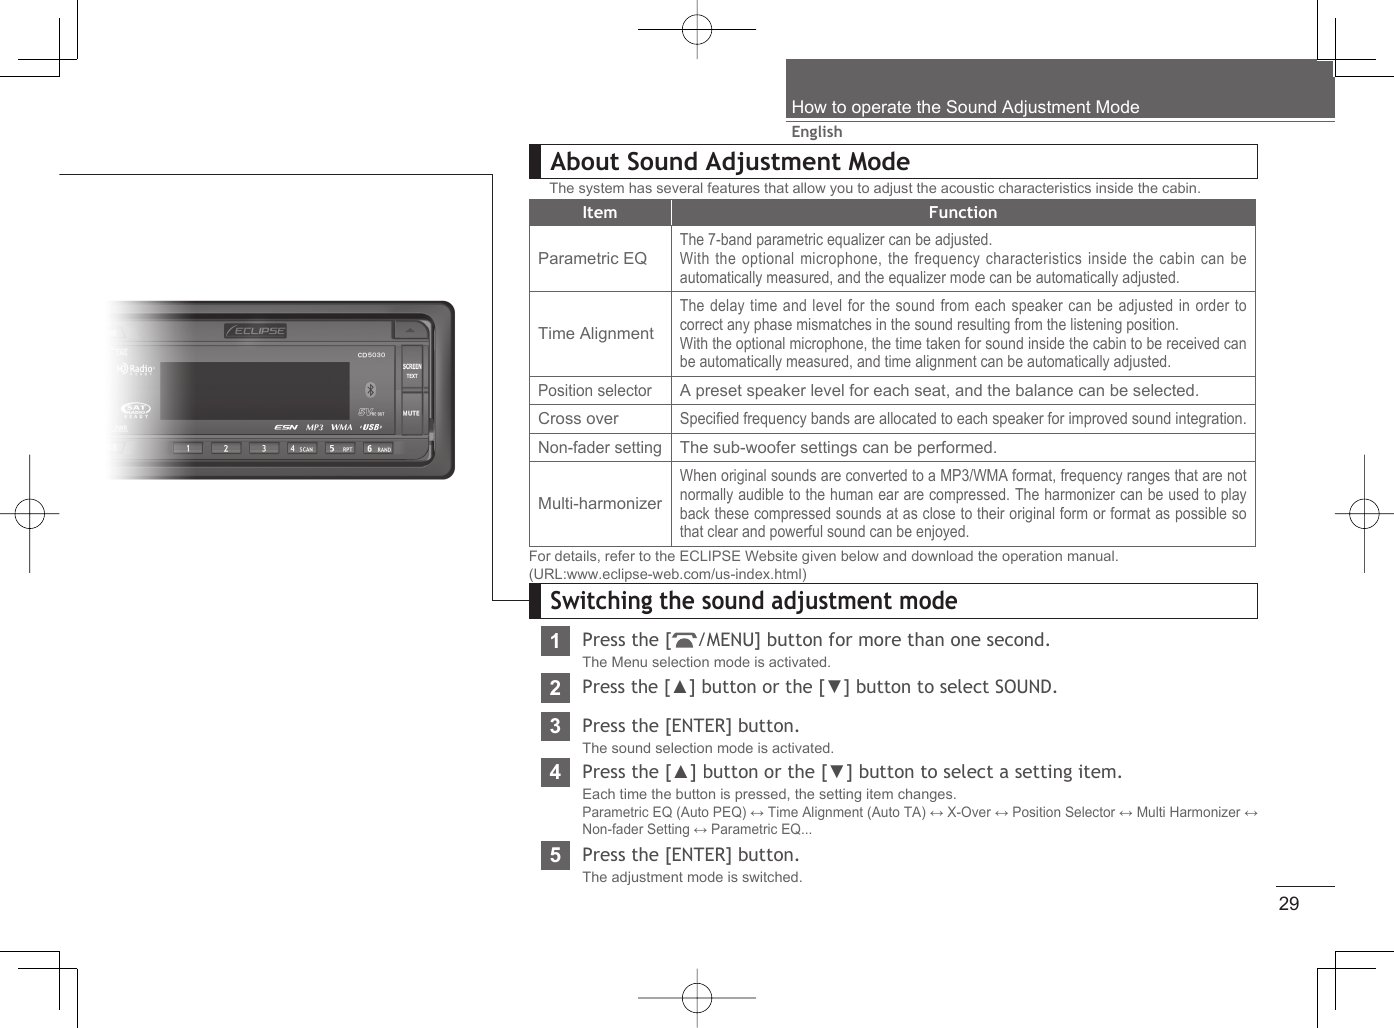 29EnglishHow to operate the Sound Adjustment ModeAbout Sound Adjustment ModeThe system has several features that allow you to adjust the acoustic characteristics inside the cabin.Item FunctionParametric EQThe 7-band parametric equalizer can be adjusted.With the optional microphone, the frequency characteristics inside the cabin can be automatically measured, and the equalizer mode can be automatically adjusted.Time AlignmentThe delay time and level for the sound from each speaker can be adjusted in order to correct any phase mismatches in the sound resulting from the listening position.With the optional microphone, the time taken for sound inside the cabin to be received can be automatically measured, and time alignment can be automatically adjusted.Position selectorA preset speaker level for each seat, and the balance can be selected.Cross overSpeciﬁ ed frequency bands are allocated to each speaker for improved sound integration.Non-fader settingThe sub-woofer settings can be performed.Multi-harmonizerWhen original sounds are converted to a MP3/WMA format, frequency ranges that are not normally audible to the human ear are compressed. The harmonizer can be used to play back these compressed sounds at as close to their original form or format as possible so that clear and powerful sound can be enjoyed.For details, refer to the ECLIPSE Website given below and download the operation manual.(URL:www.eclipse-web.com/us-index.html)Switching the sound adjustment mode1Press the [ /MENU] button for more than one second.The Menu selection mode is activated.2Press the [▲] button or the [▼] button to select SOUND.3Press the [ENTER] button.The sound selection mode is activated.4Press the [▲] button or the [▼] button to select a setting item.Each time the button is pressed, the setting item changes.Parametric EQ (Auto PEQ) ↔ Time Alignment (Auto TA) ↔ X-Over ↔ Position Selector ↔ Multi Harmonizer ↔ Non-fader Setting ↔ Parametric EQ...5Press the [ENTER] button.The adjustment mode is switched.